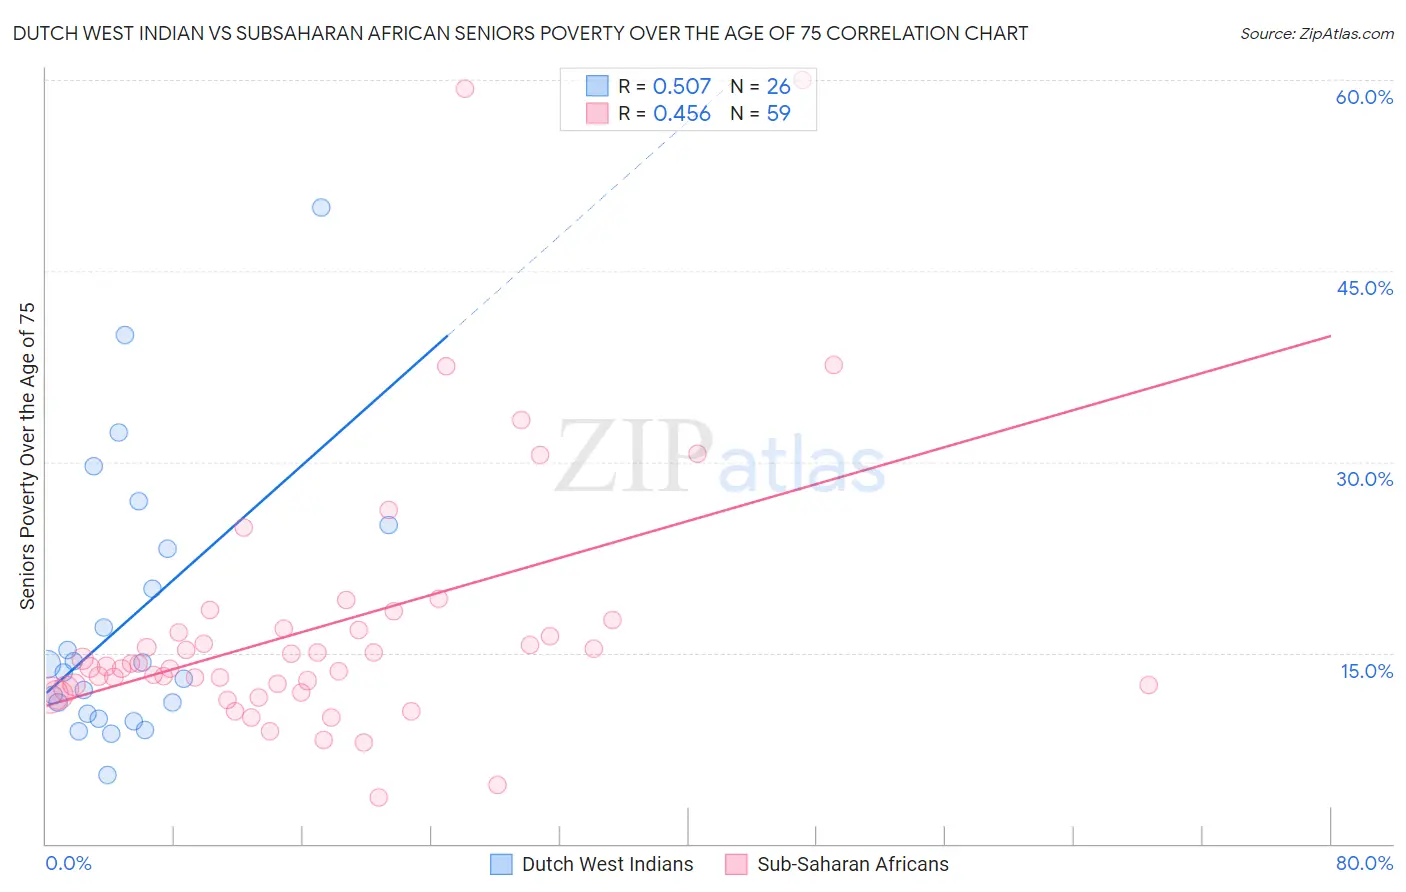 Dutch West Indian vs Subsaharan African Seniors Poverty Over the Age of 75